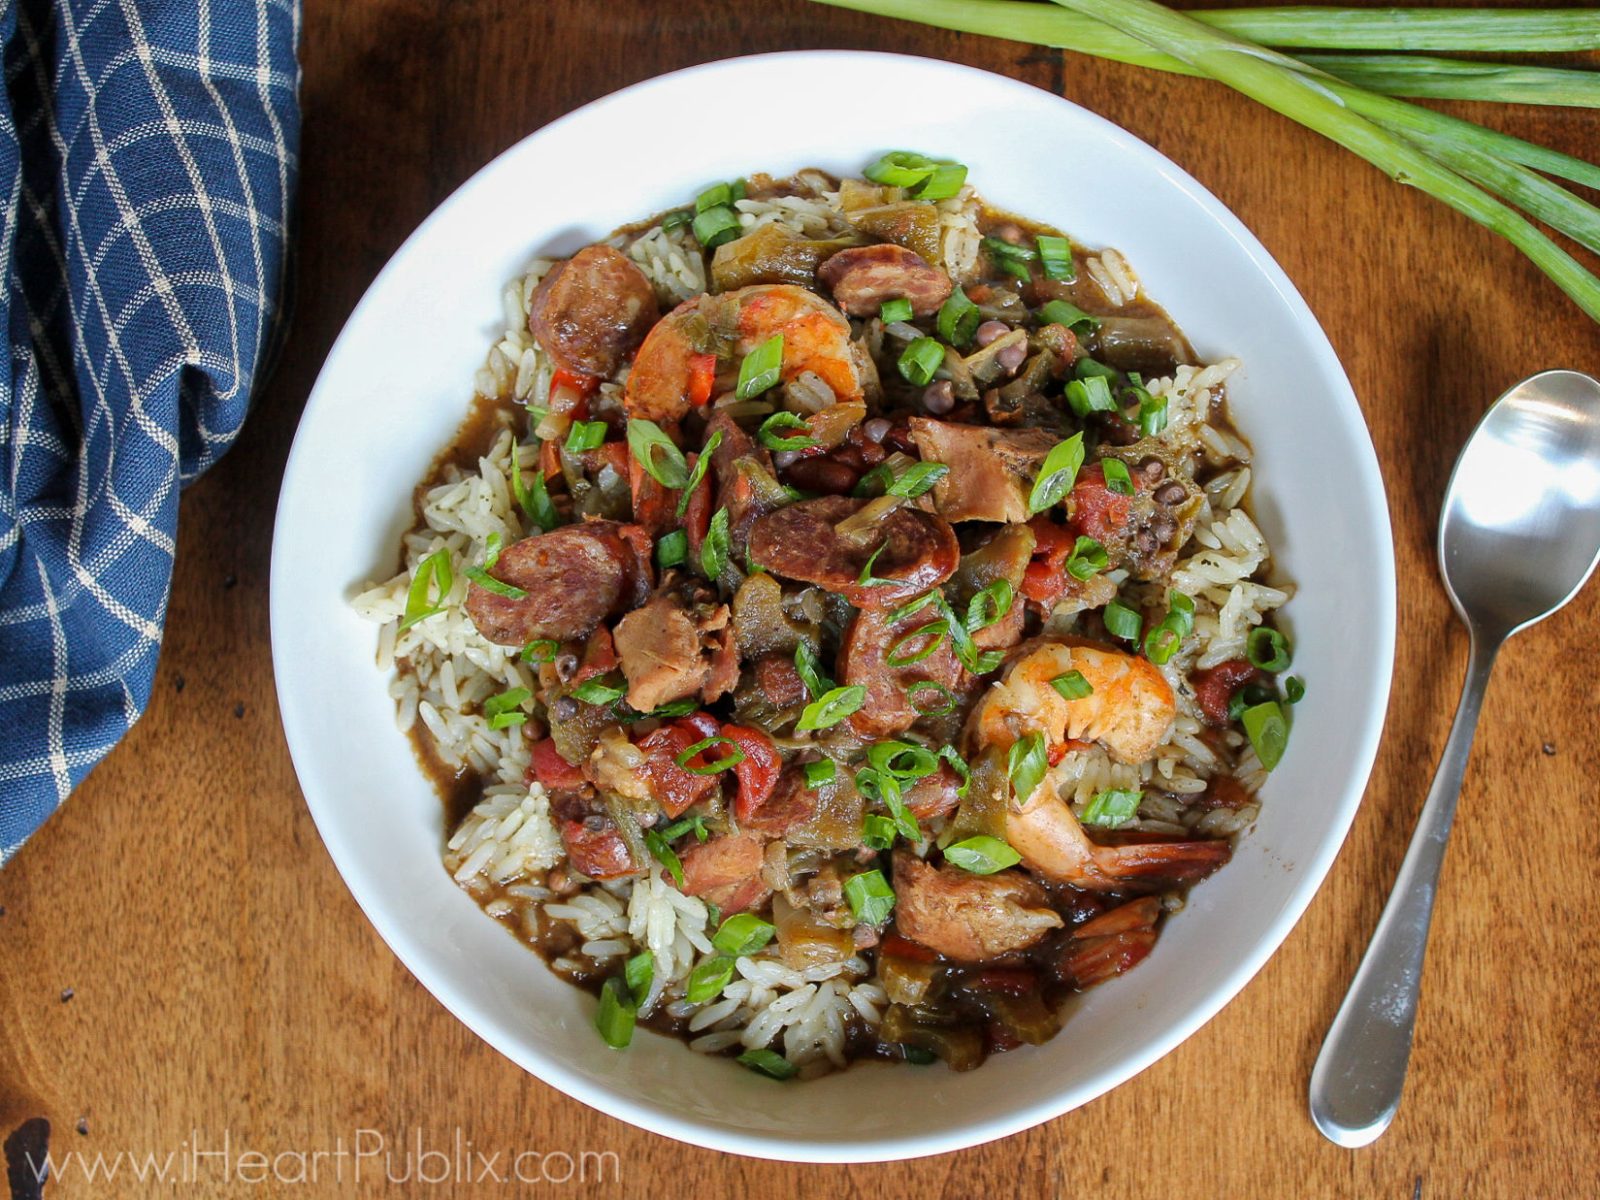 Slow Cooker Gumbo – Super Meal To Go With The Jambalaya Girl & Kiolbassa Sales At Publix!